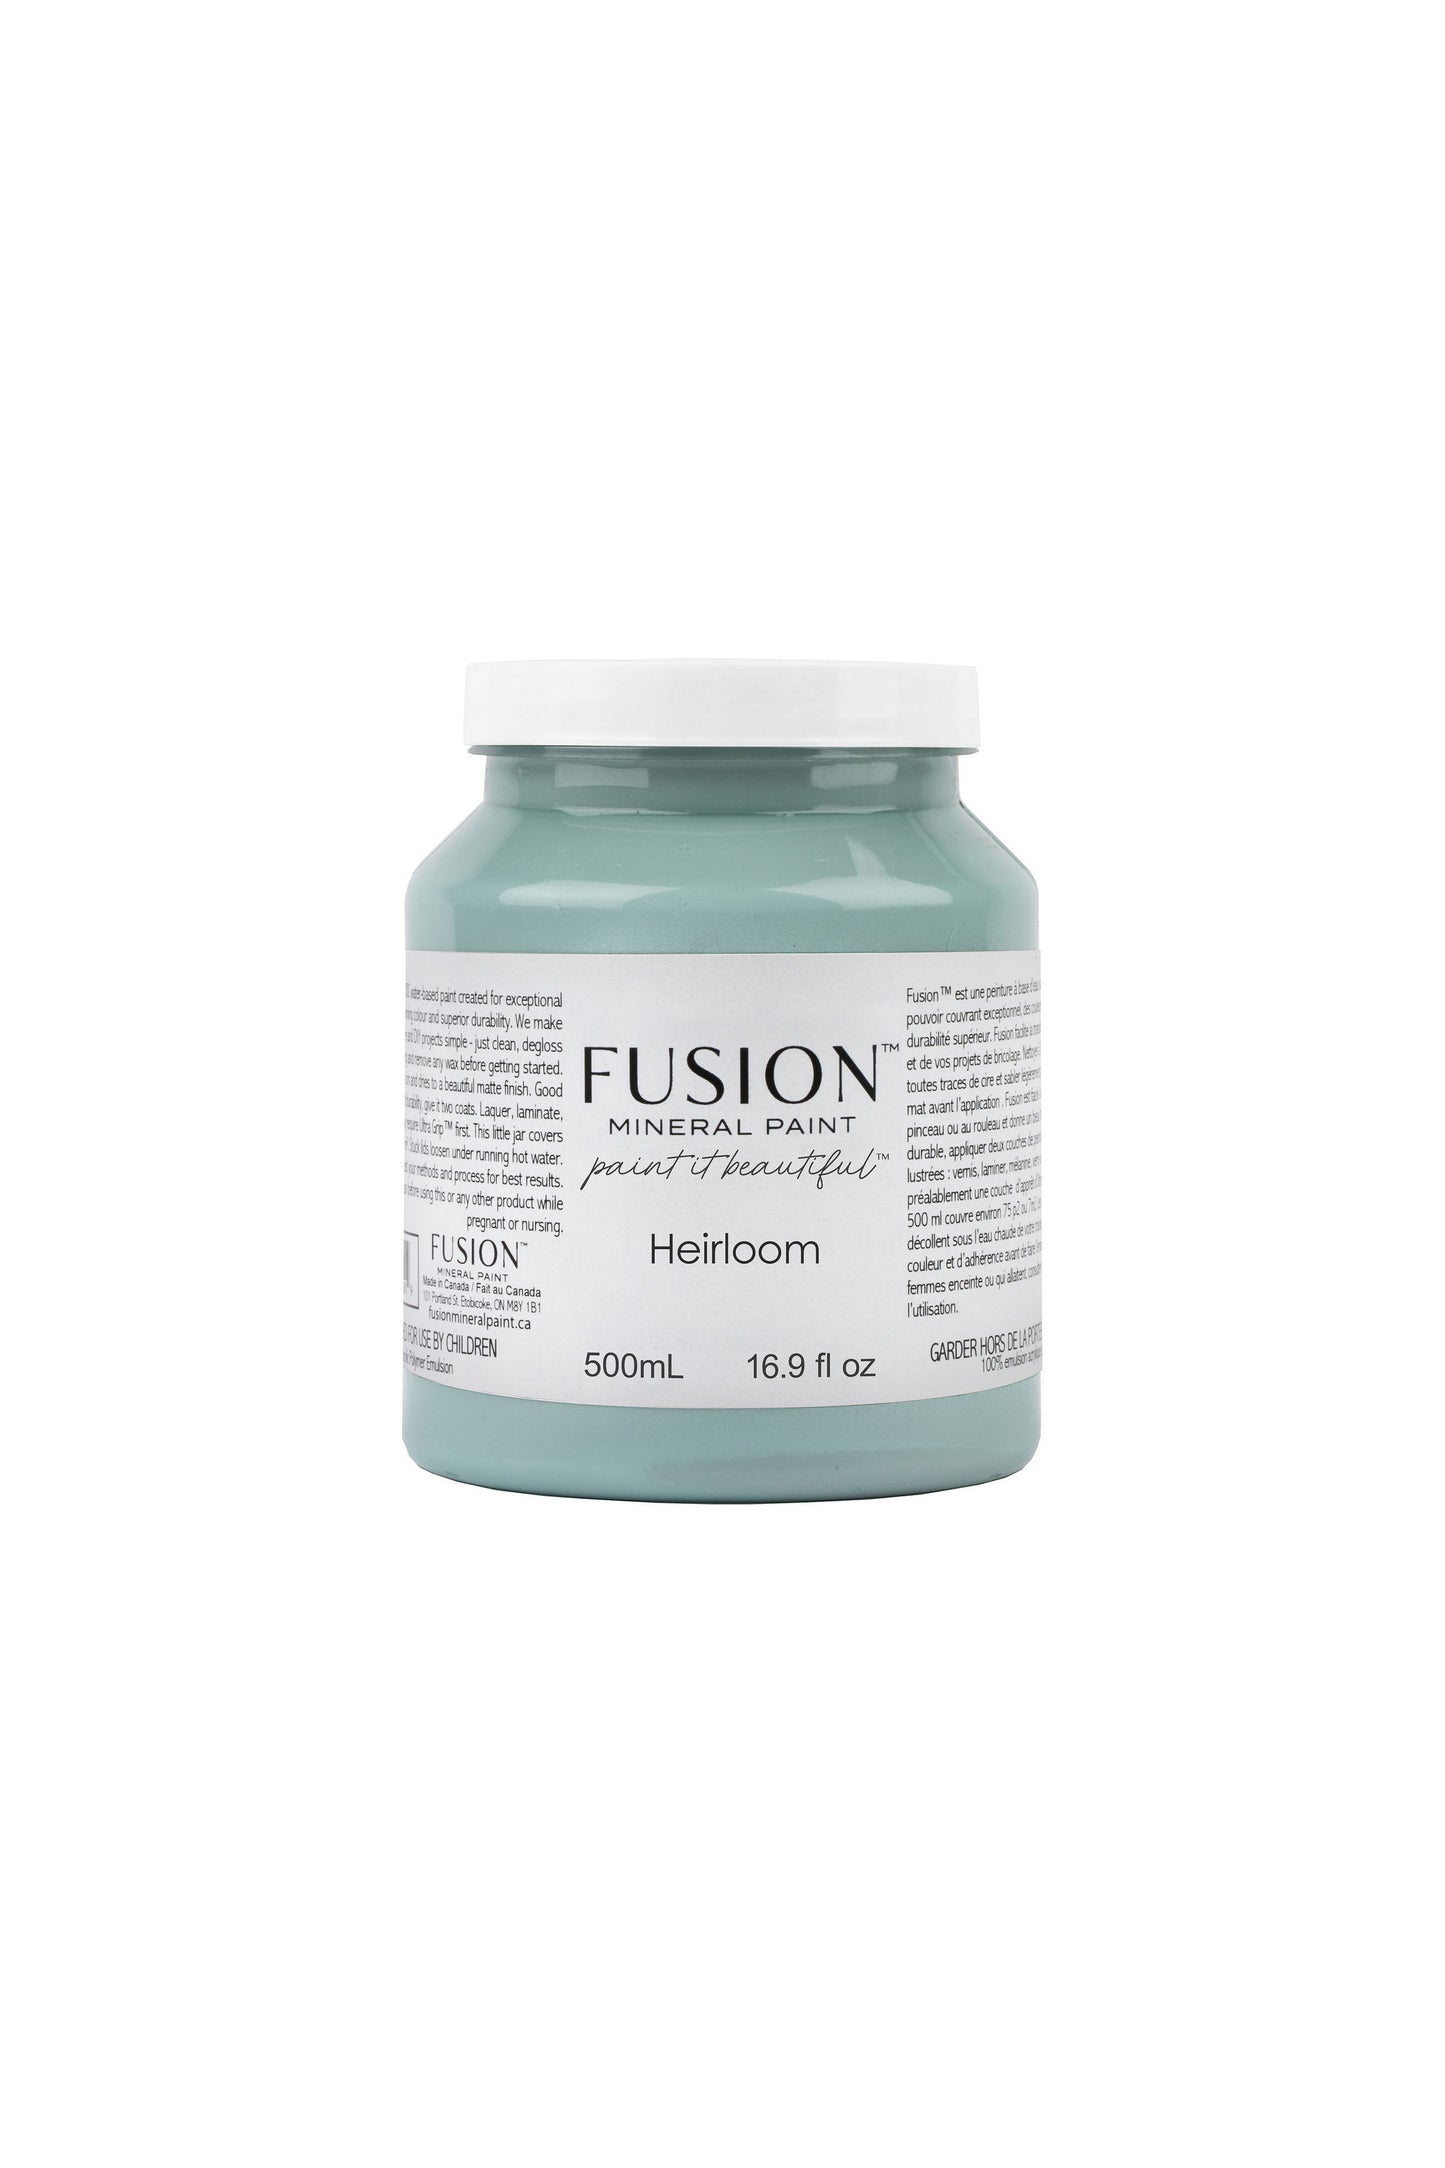 FUSION MINERAL PAINT- Heirloom